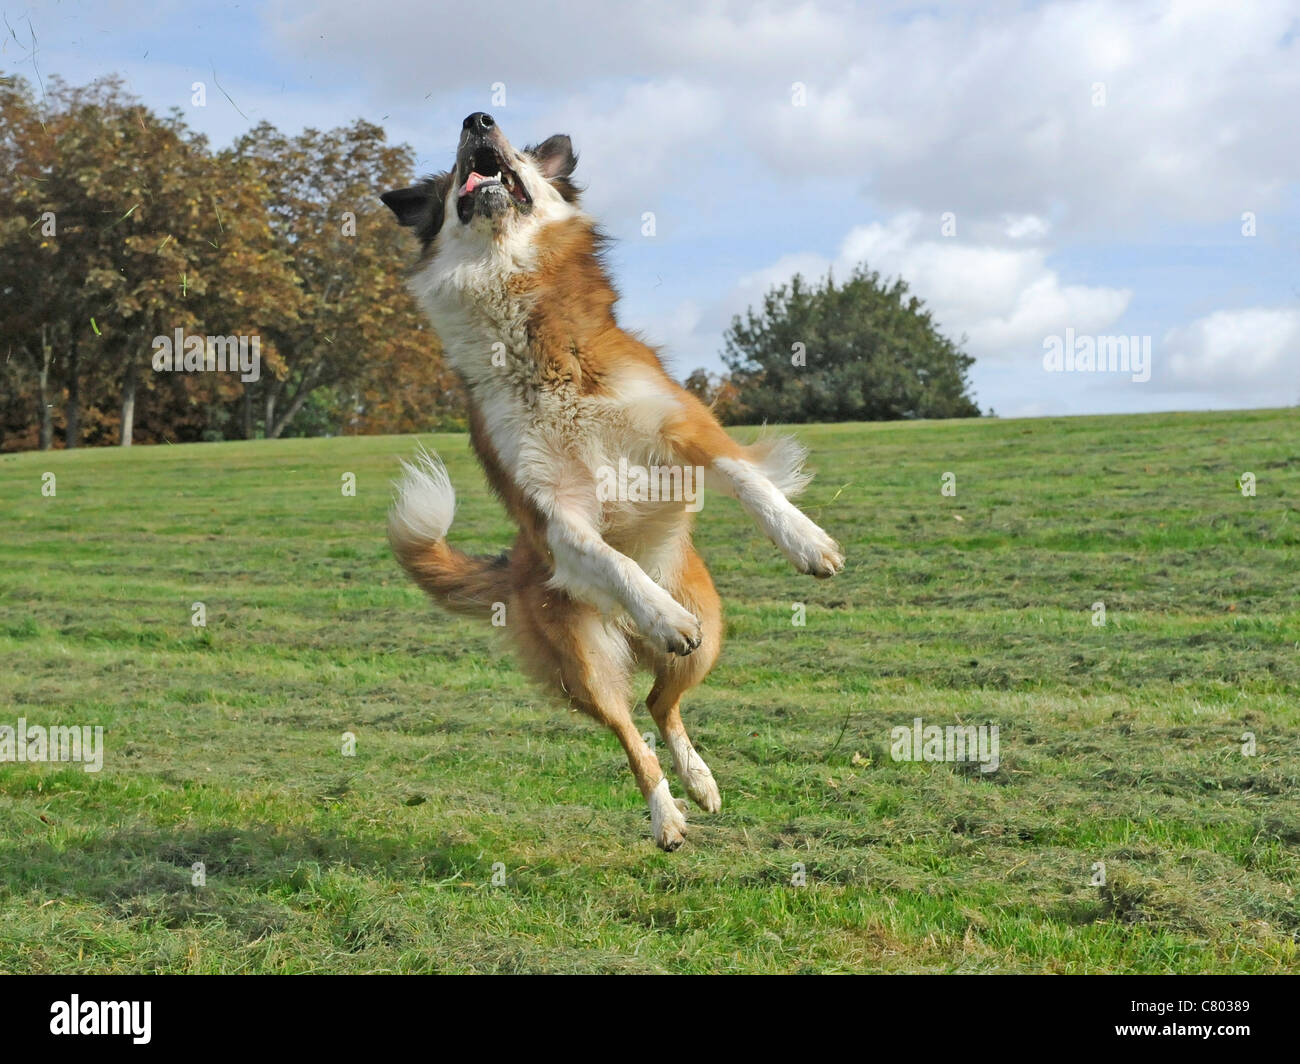 A collie cross dog leaping in the air Stock Photo